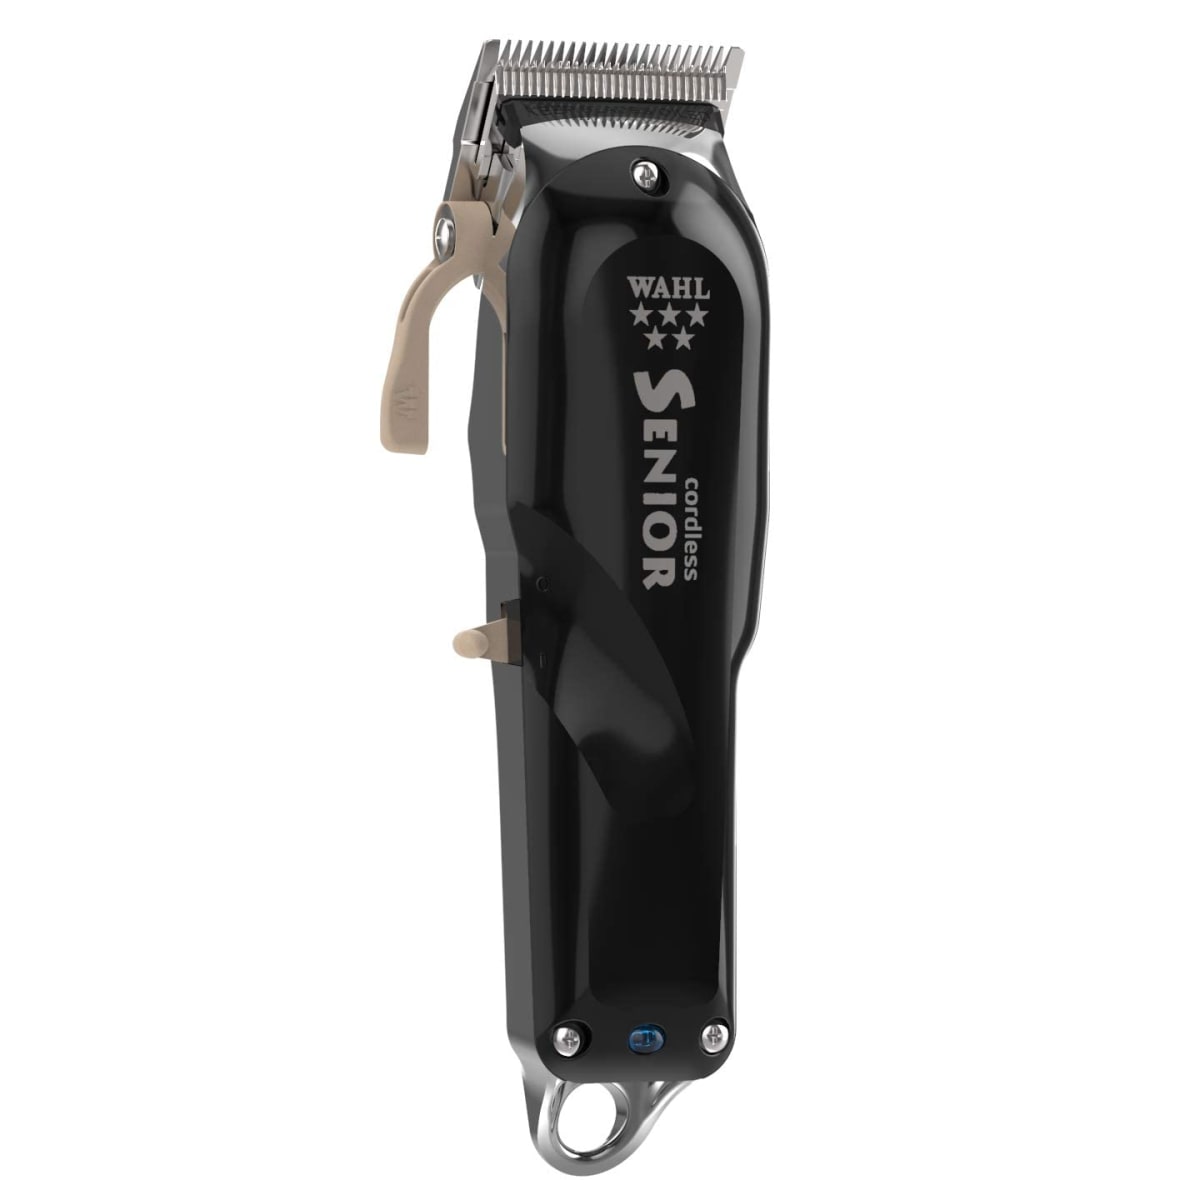 5 Star Series Cordless Senior Clipper with Adjustable Blade